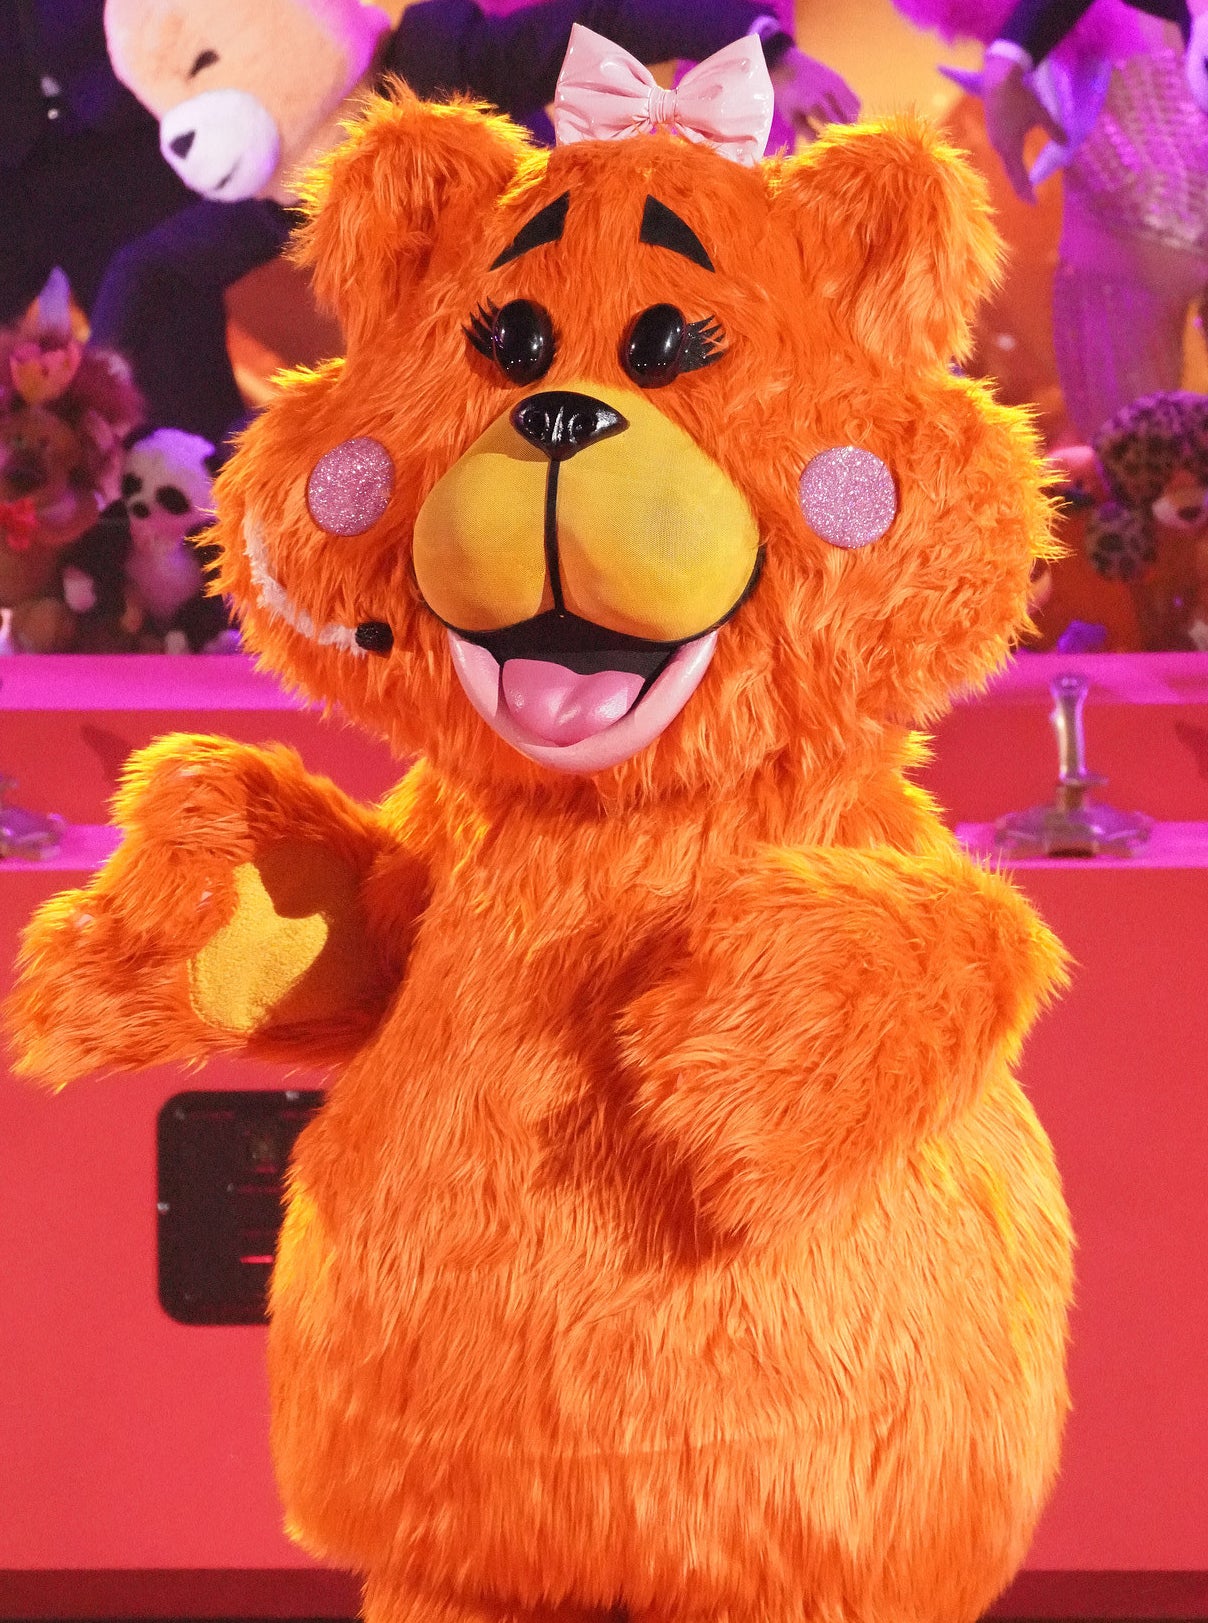 A person in a teddy bear costume